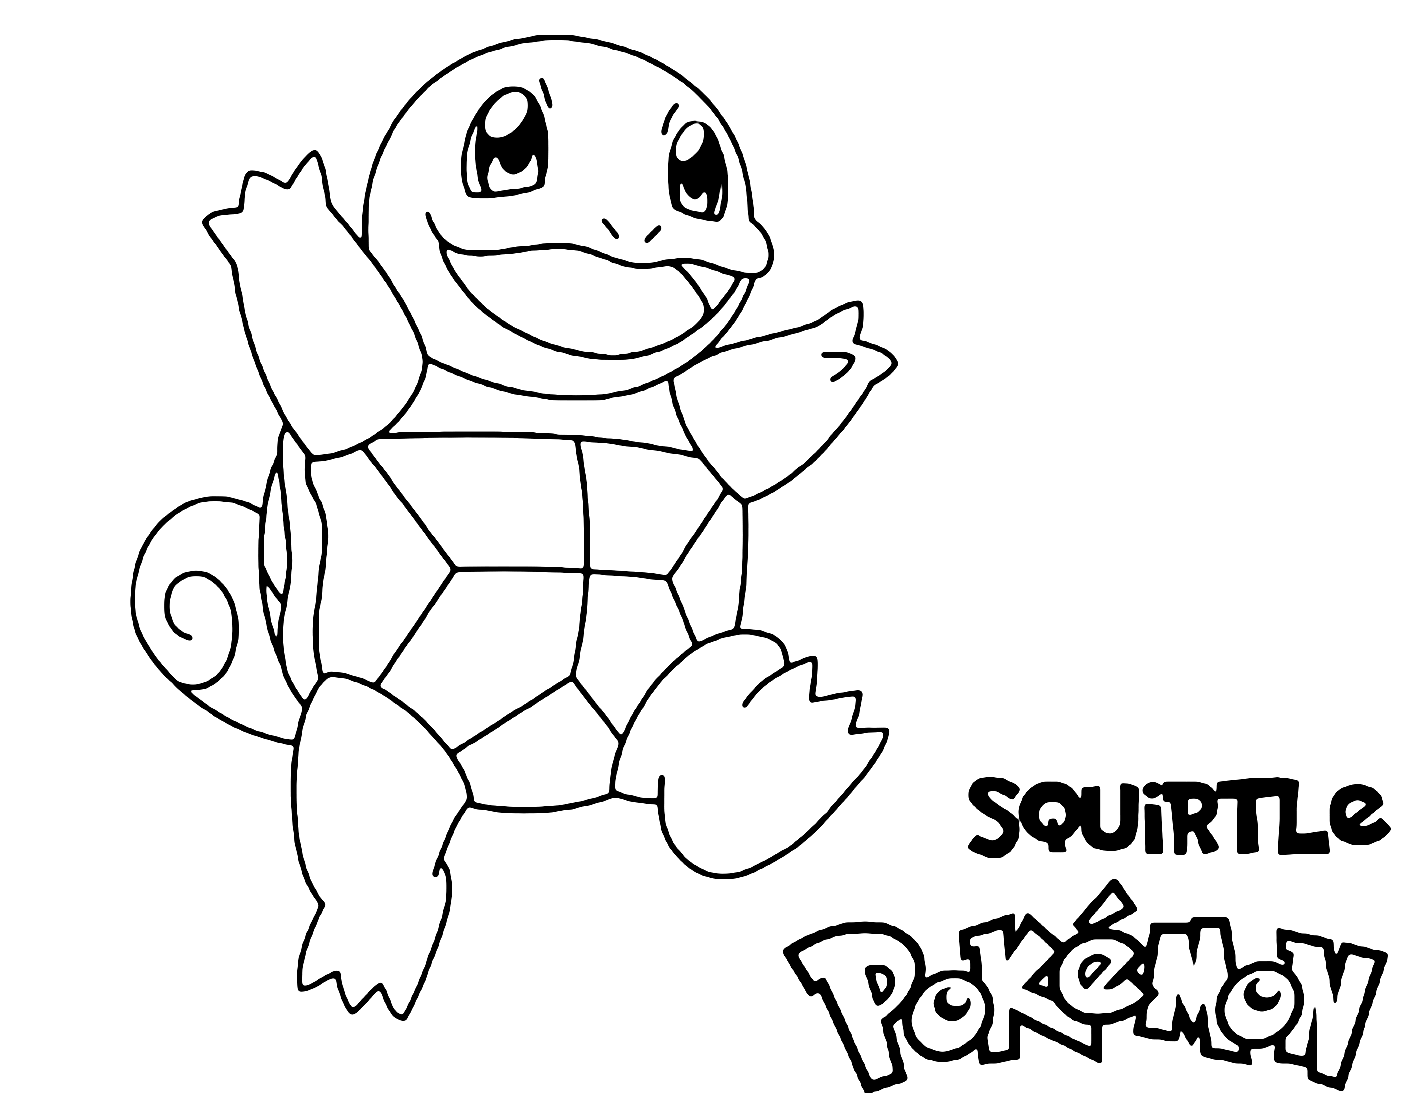 Squirtle Water Pokemon Coloring Page